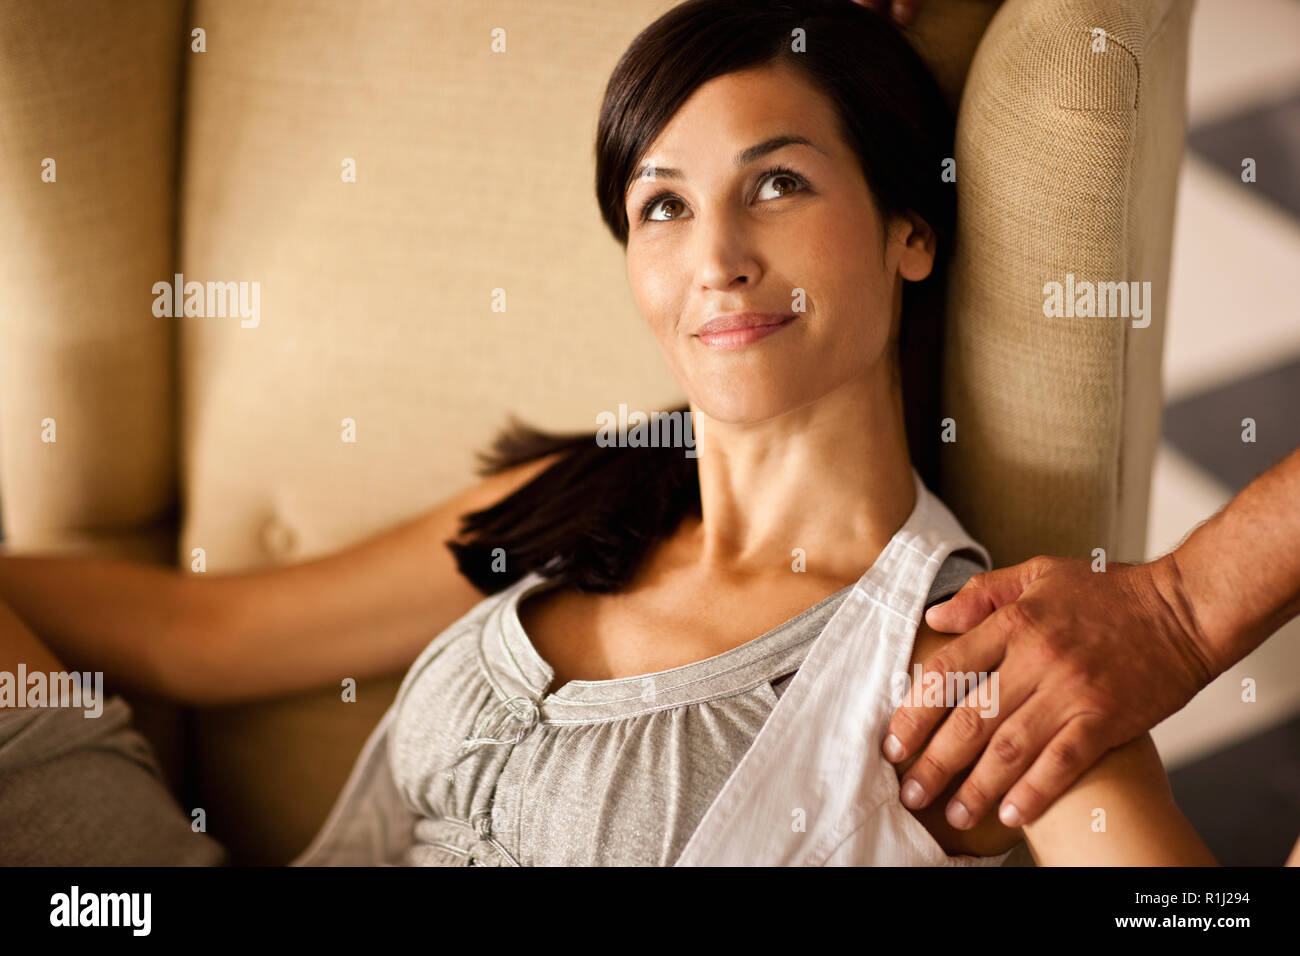 Mid-adult woman relaxing on armchair with a male hand on her shoulder. Stock Photo